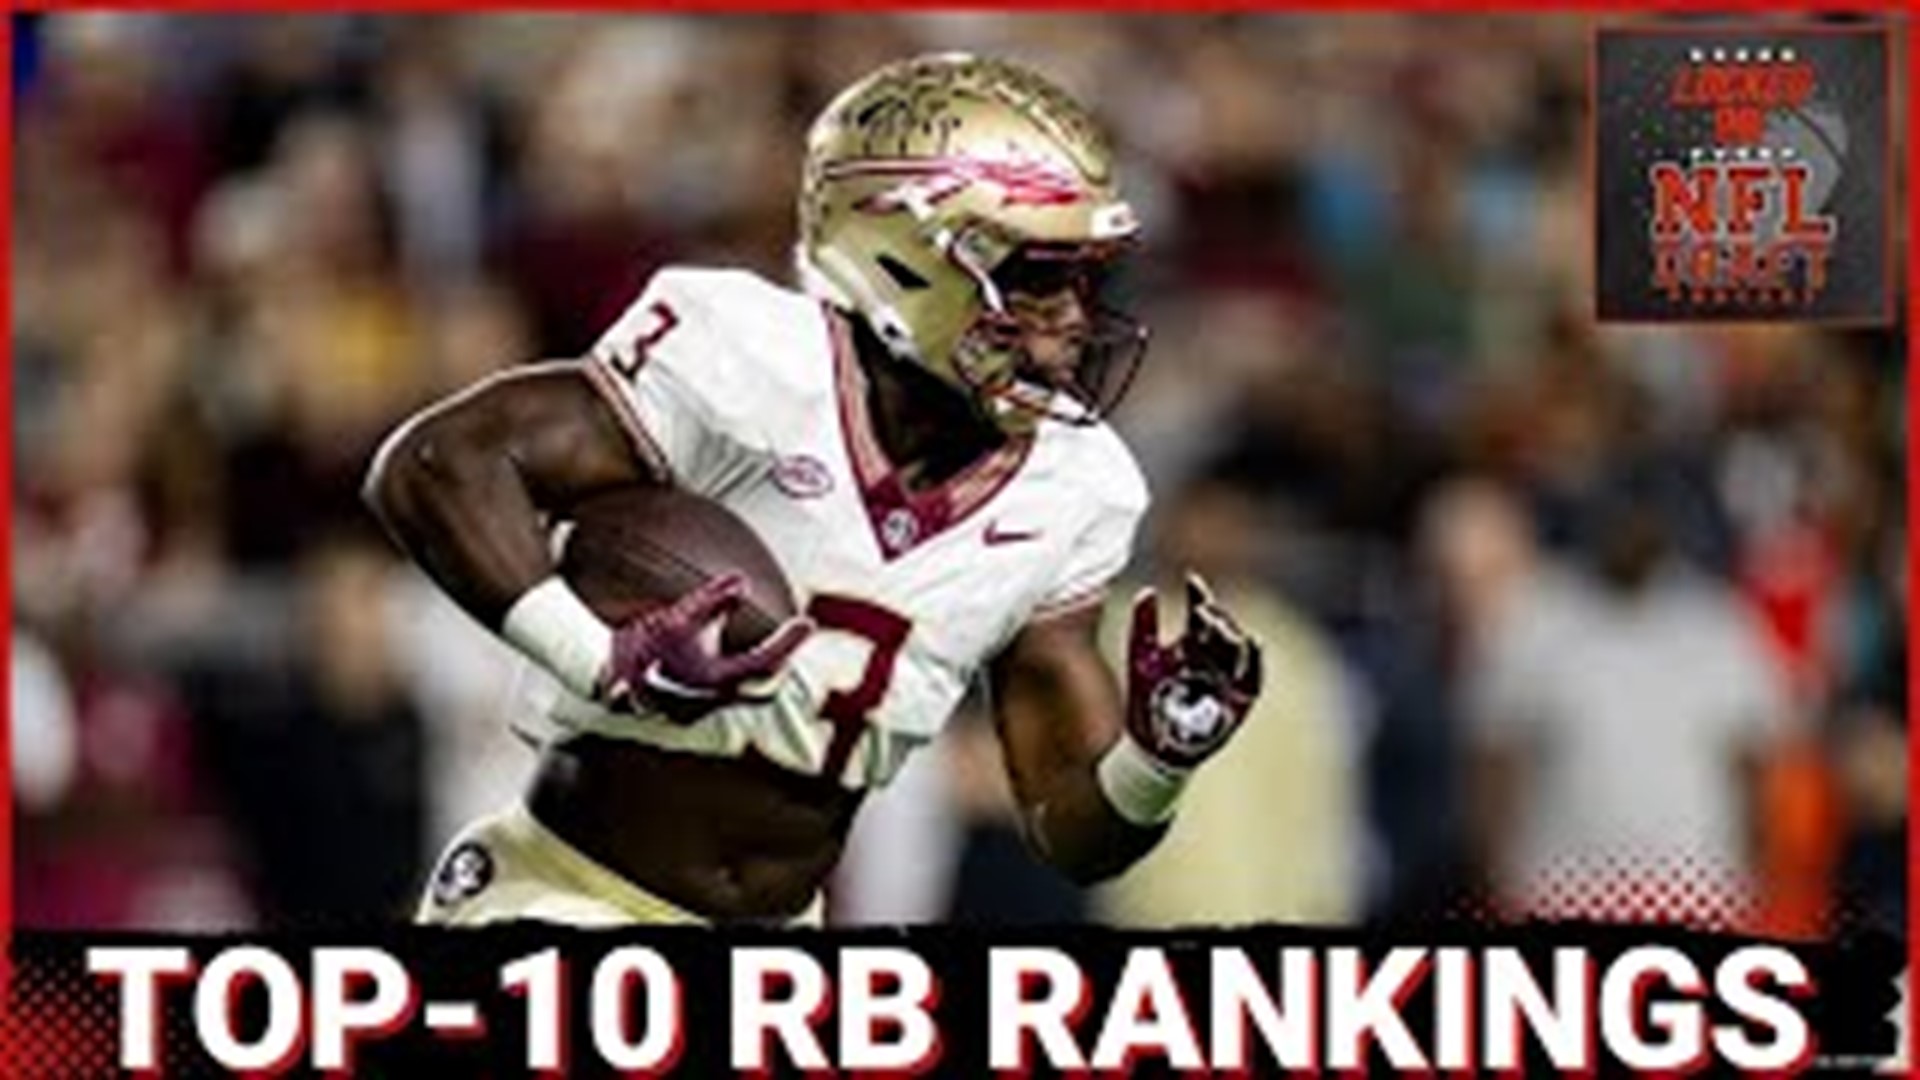 FSU's Trey Benson owns top spot of Dame's Top10 RB Rankings of the